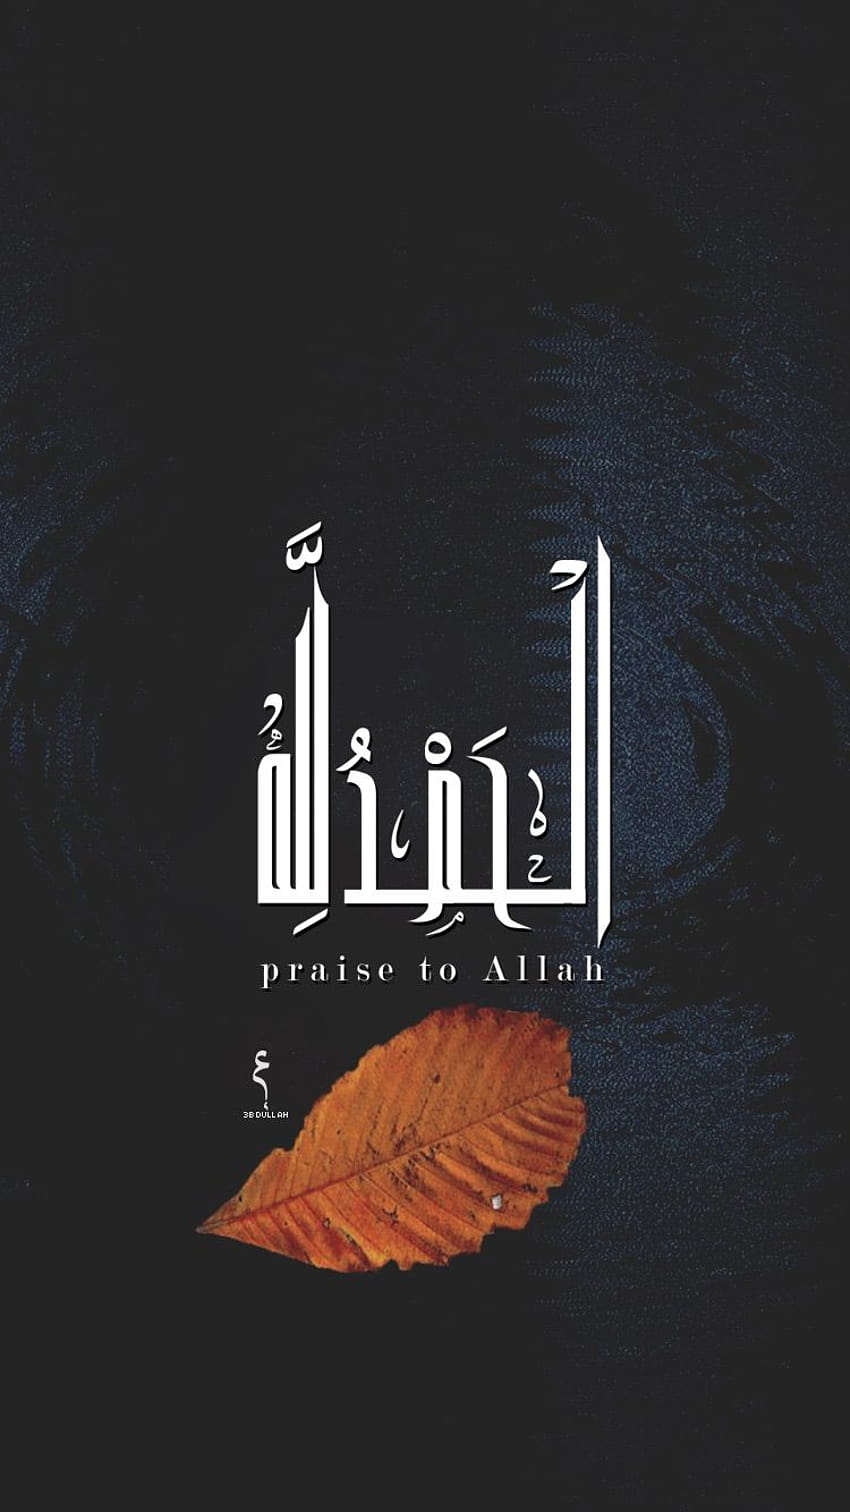 Allah posted by Ethan Walker, iphone islam HD phone wallpaper